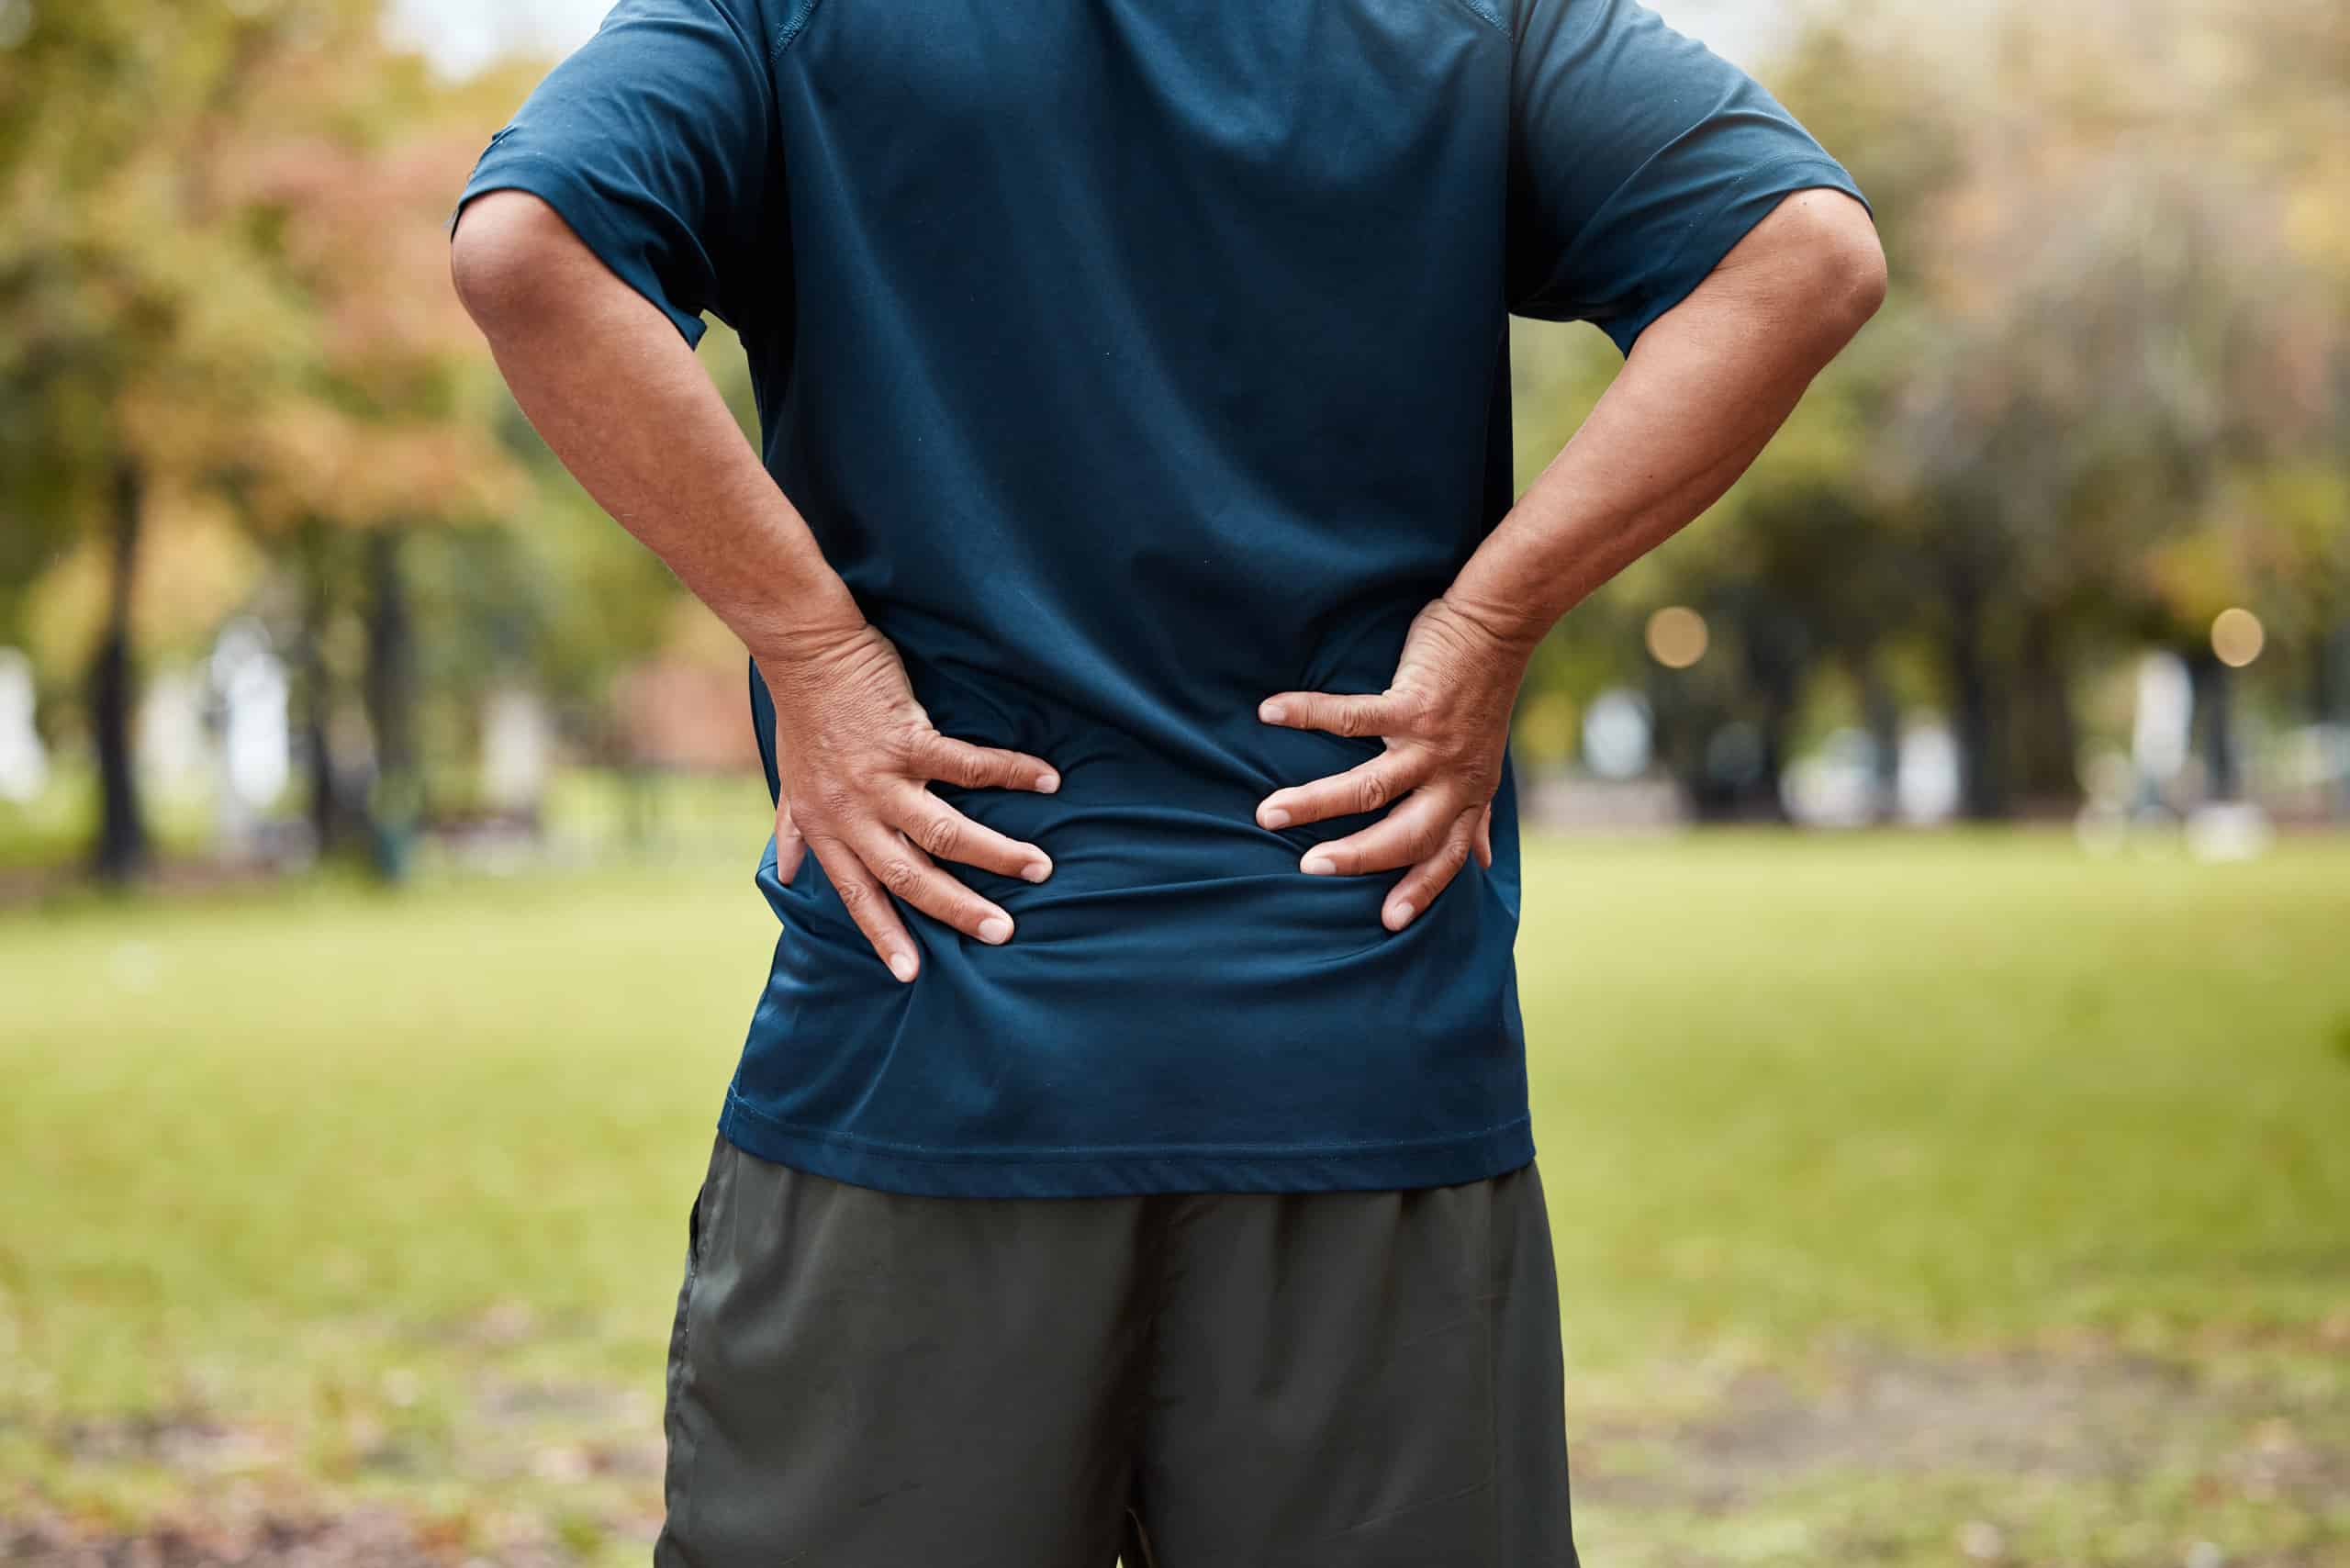 The Connection Between Exercise, Posture, and Back Pain